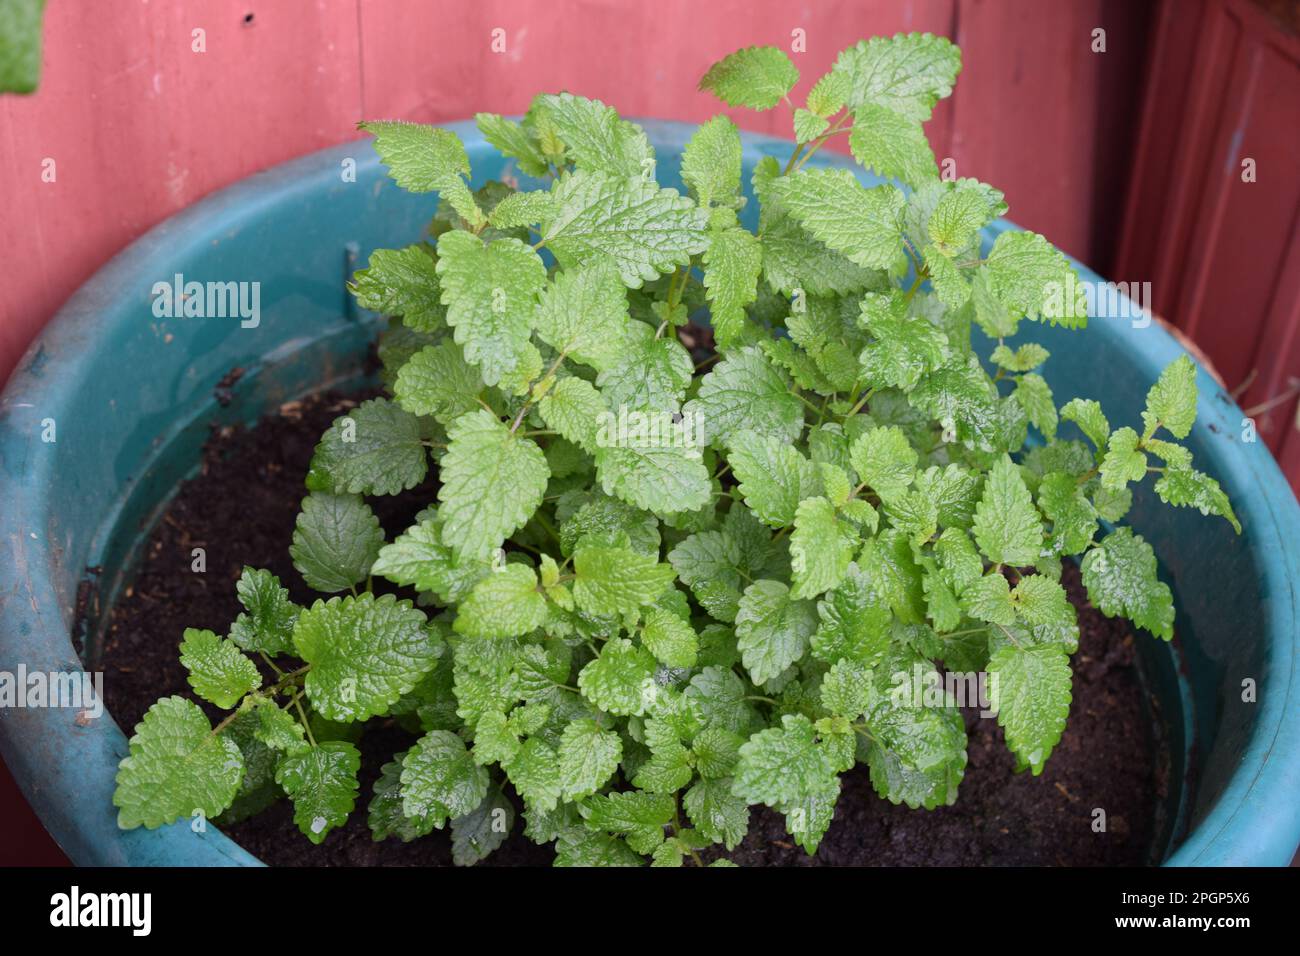 Lemon balm is a member of the mint family and is considered a calming herb. This herb genus gets its name from the Greek word for “honey Bees.” Stock Photo